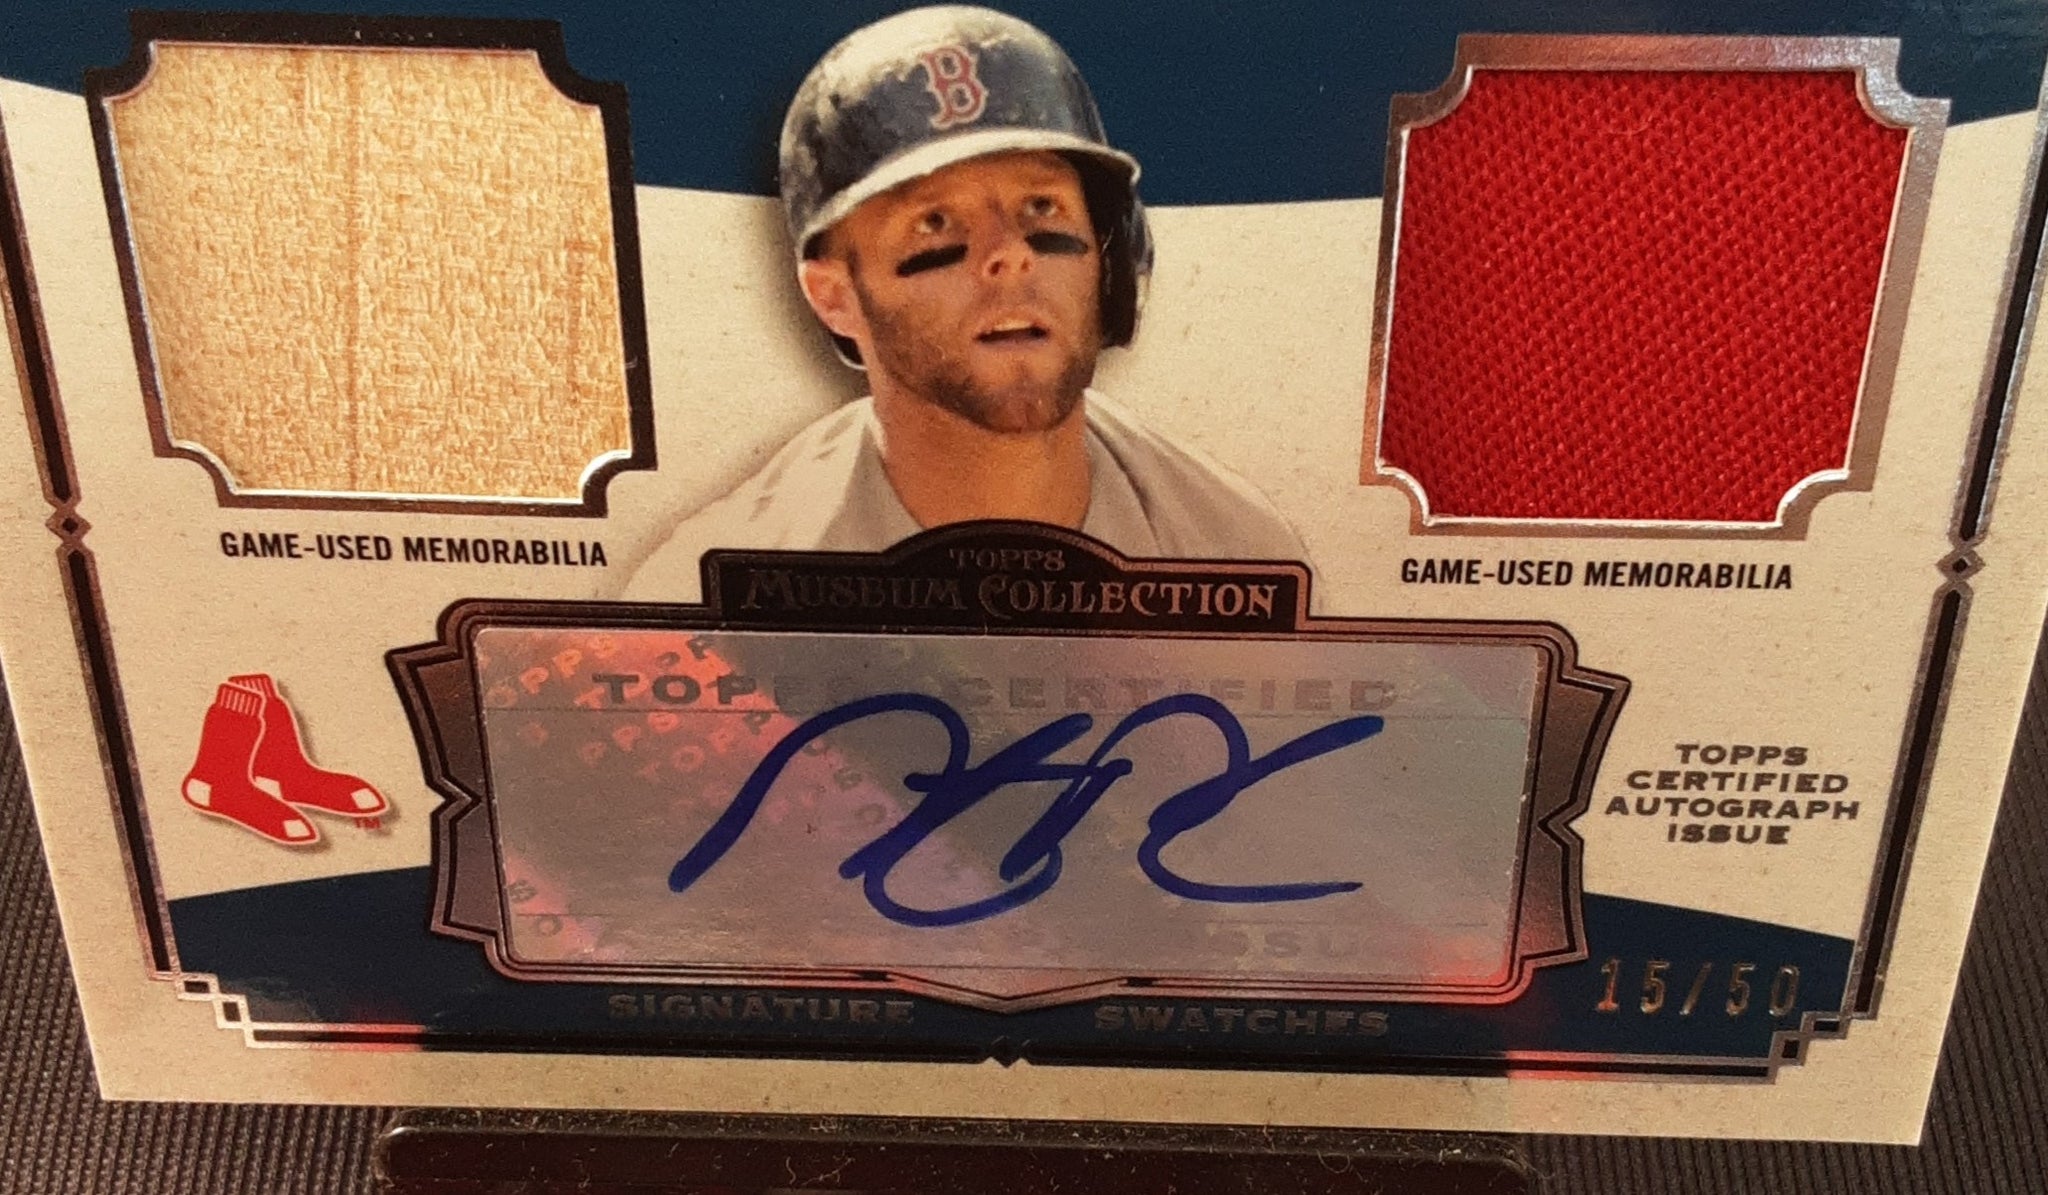 2013 Topps Musuem Collection Card #SSADR-DP Dustin Pedroia Auto/50